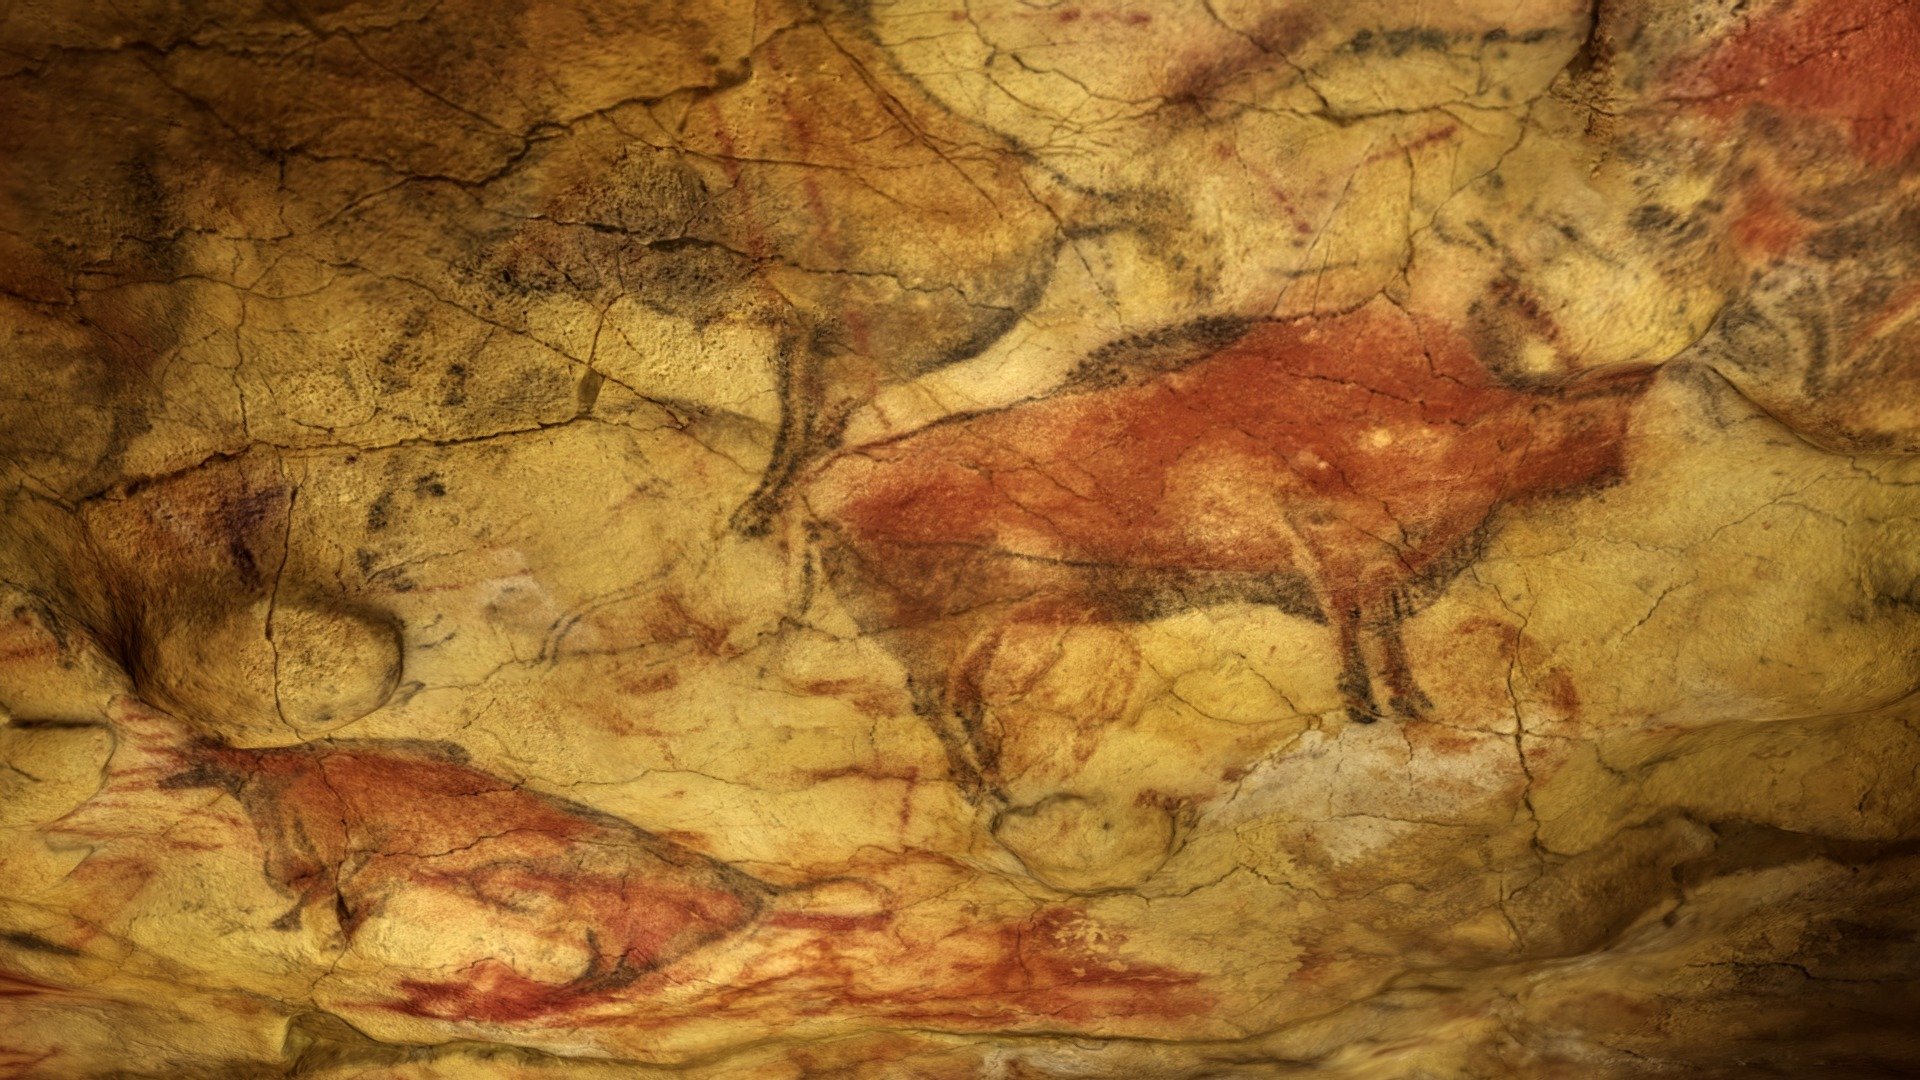 Spain’s Altamira Cave is known for some of the most pristine examples of Paleolithic cave paintings, pictographs and petroglyphs. The bulls painted on the ceiling are at least 14,000 years old, and with new dating techniques, archaeologists have determined that painting first started in this chamber more than 34,000 years ago.
More on the dating and discovery of Altamira here: https://www.ancientartarchive.org/altamira-cave-spain/ - Altamira Cave Ceiling, Spain - 3D model by Ancient Art Archive (@ancientartarchive) 3d model